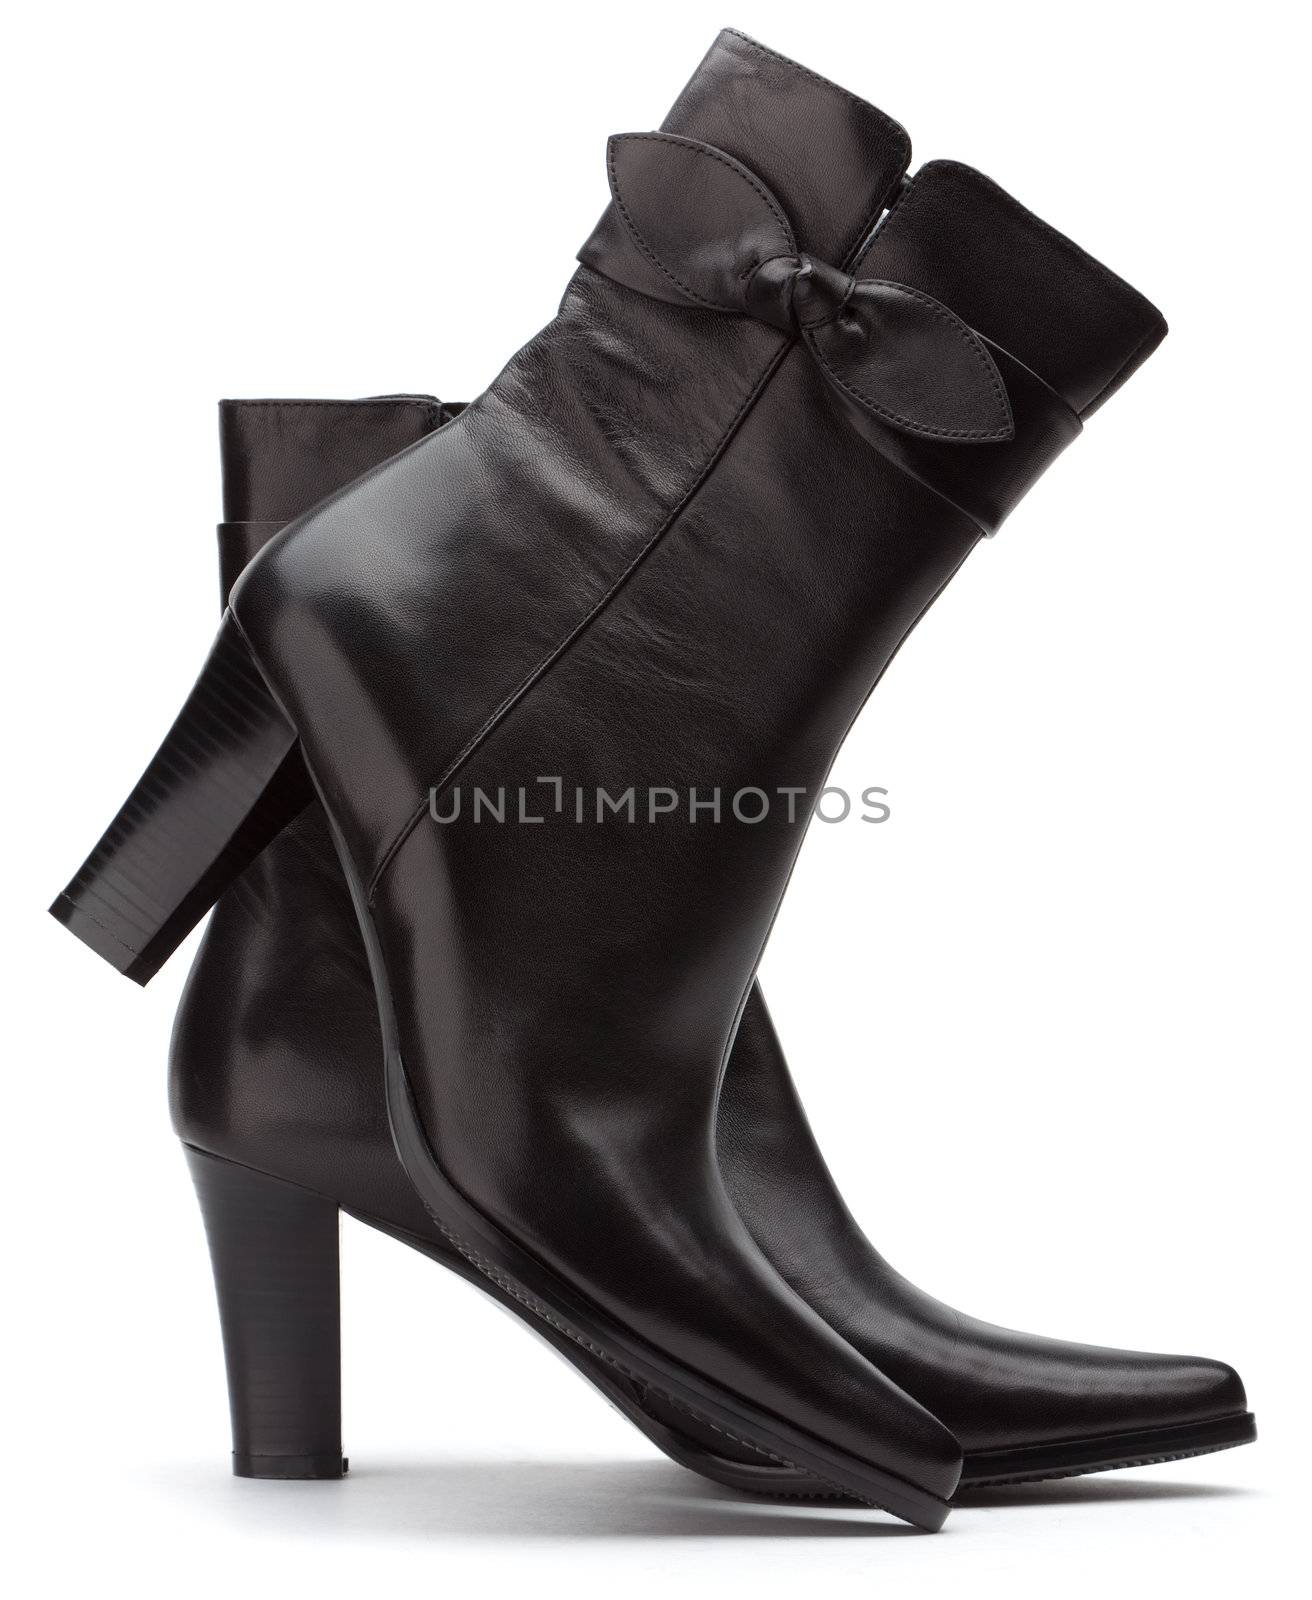 Ladies short black boots on a white background